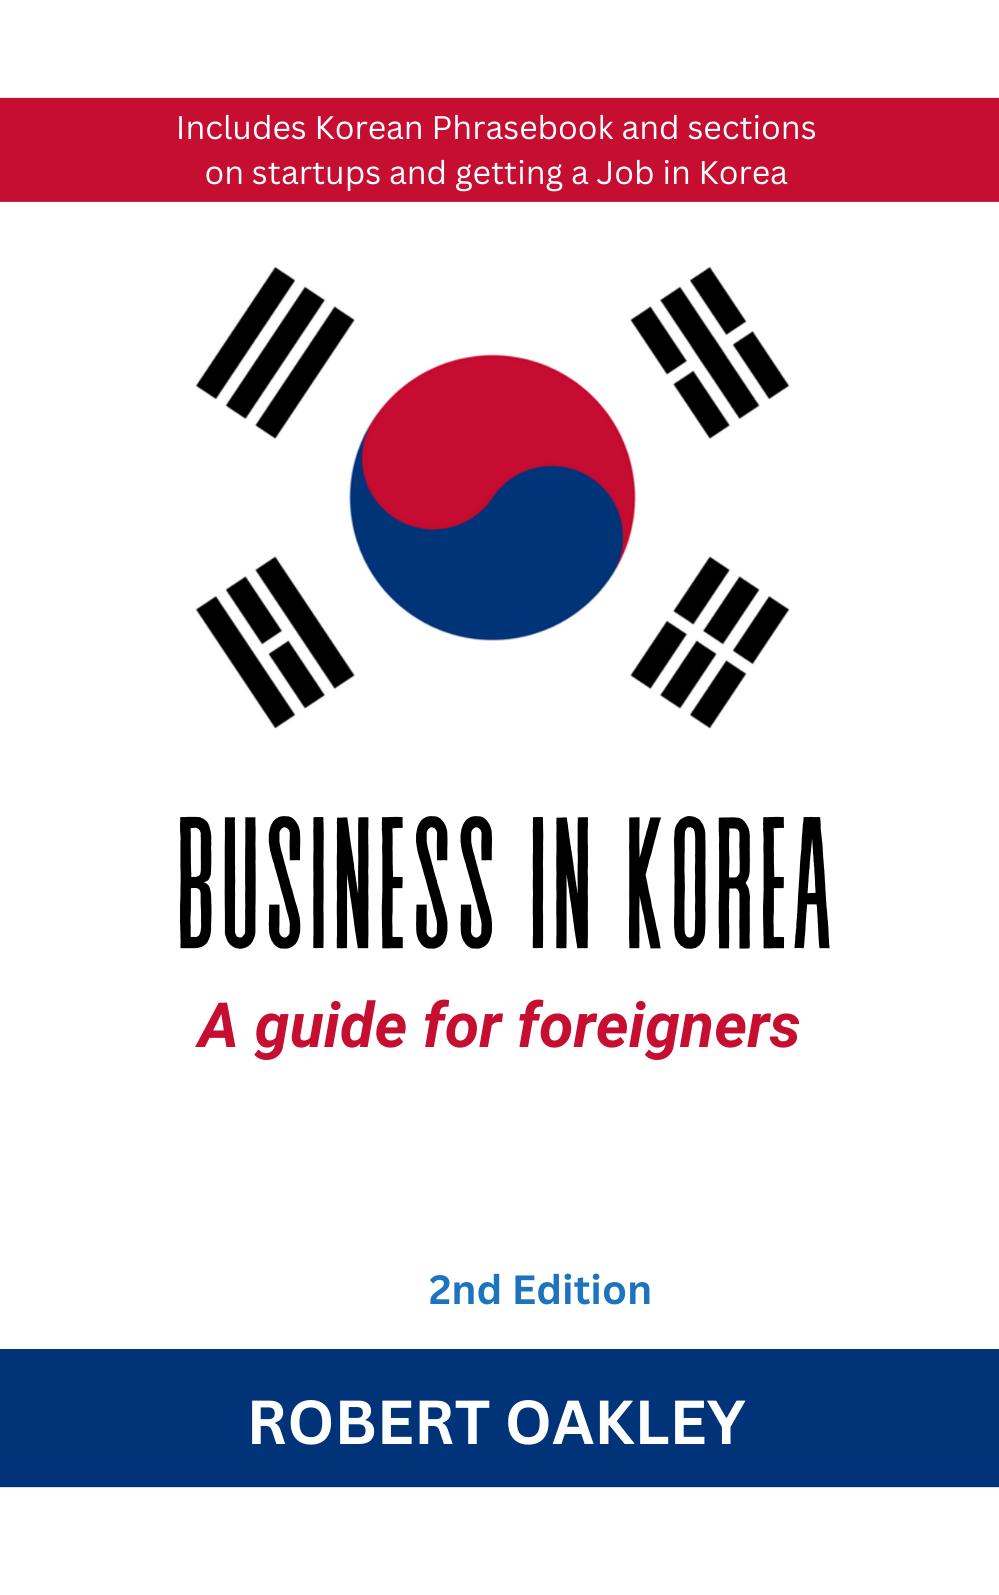 Business In Korea book 2nd Edition